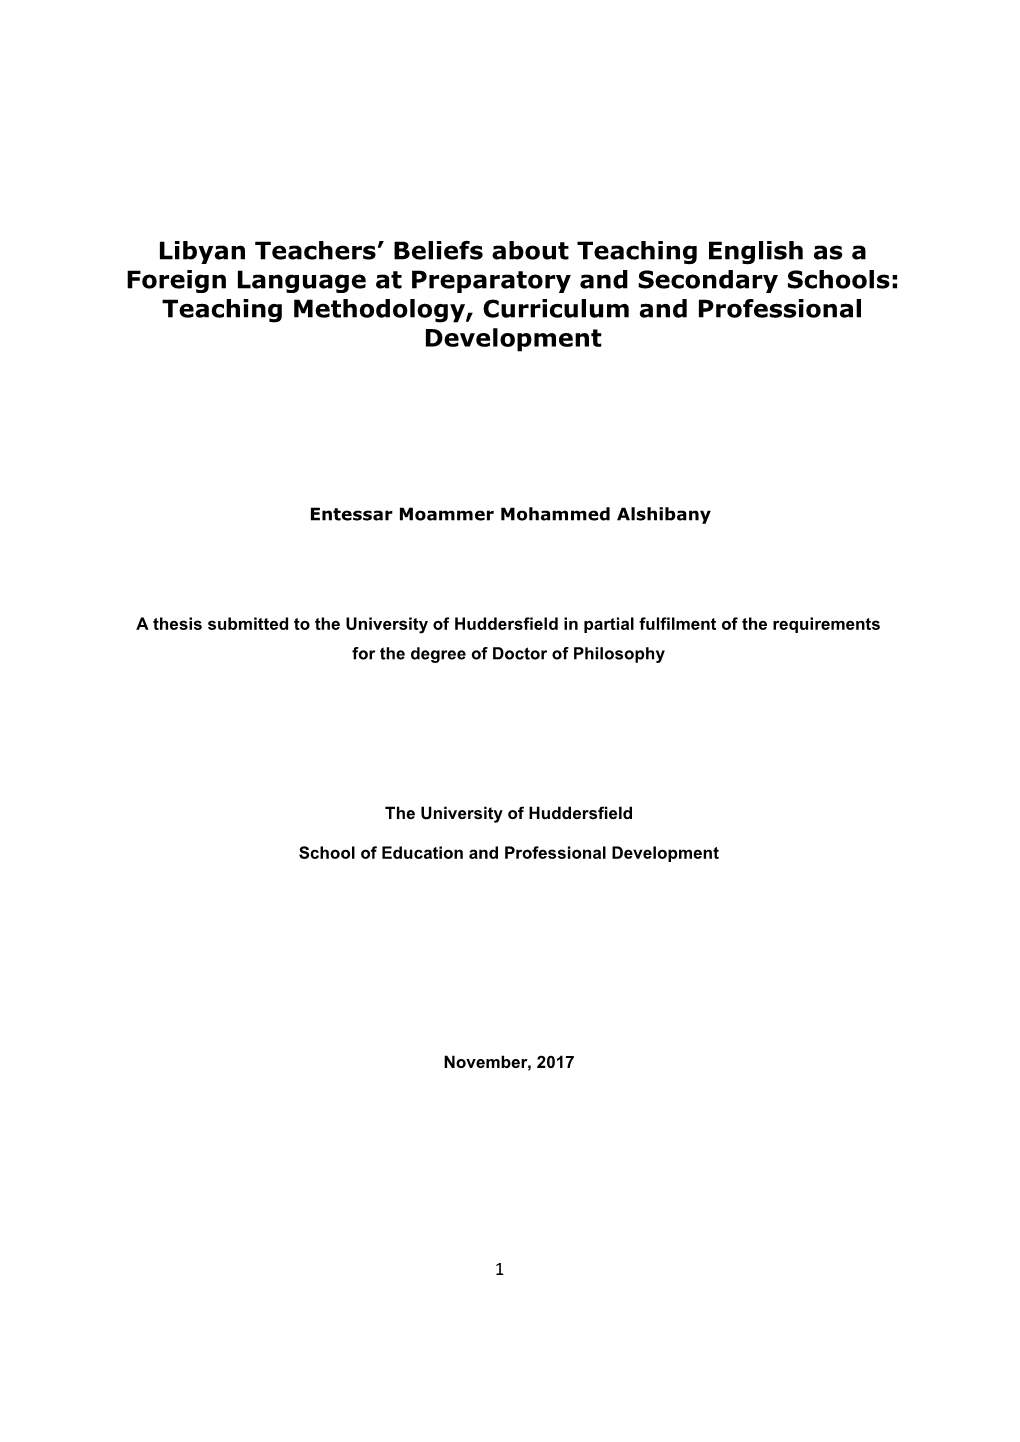 Libyan Teachers' Beliefs About Teaching English As a Foreign Language in Terms of the Teaching Methodologies, Professionalism and the Current Curriculum